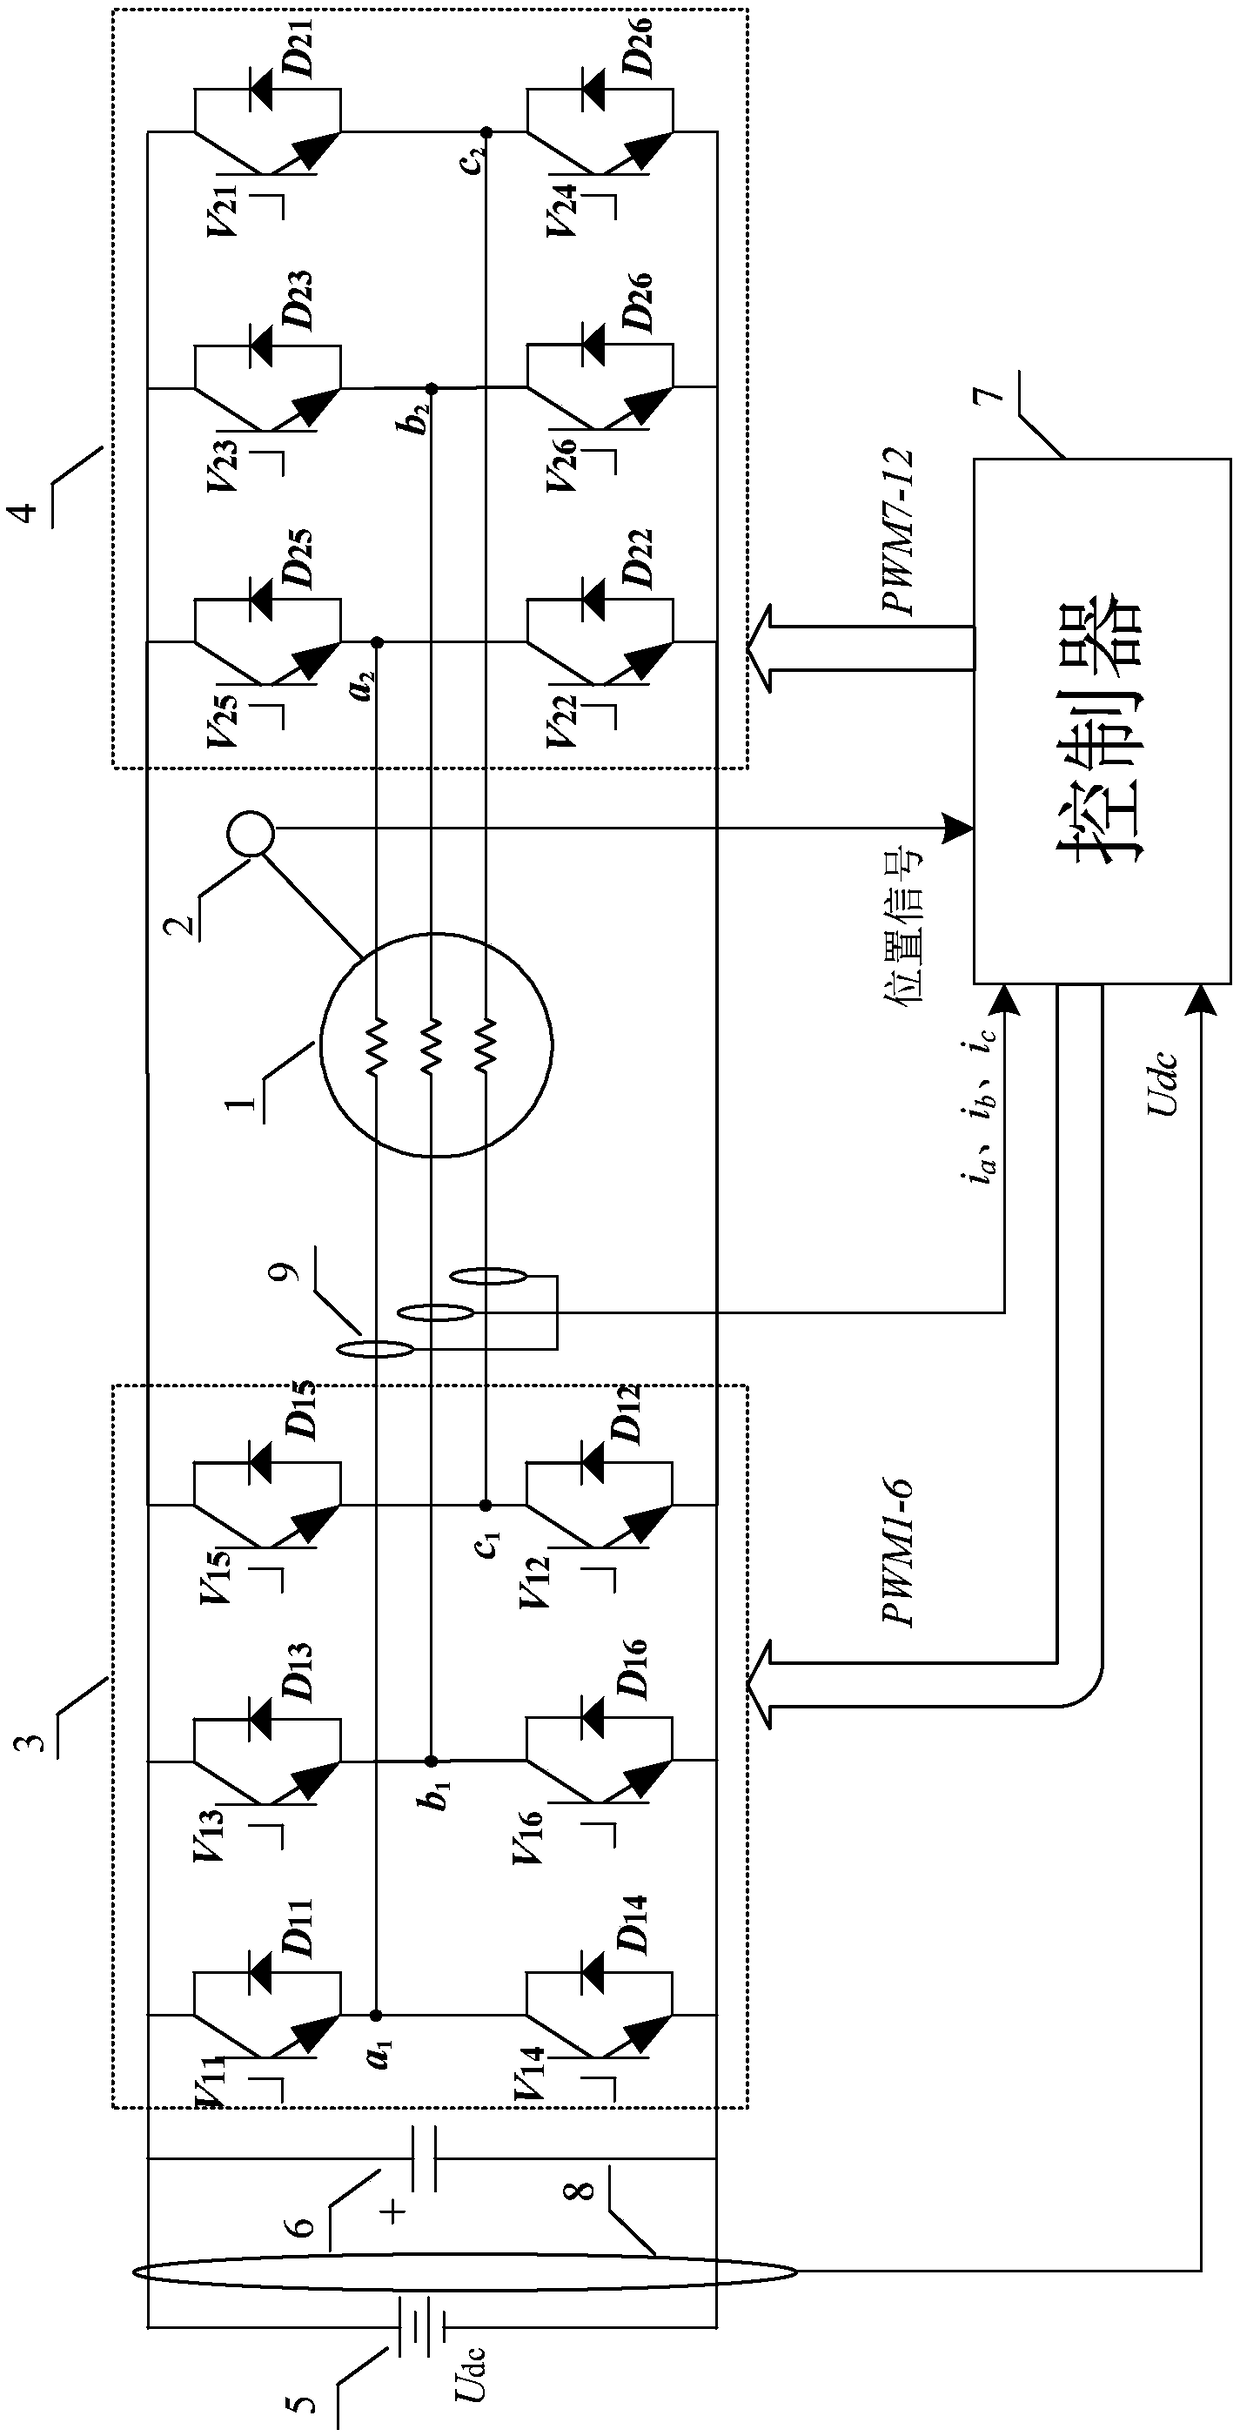 A zero-sequence current suppression control system and method for rare-earth permanent magnet motors